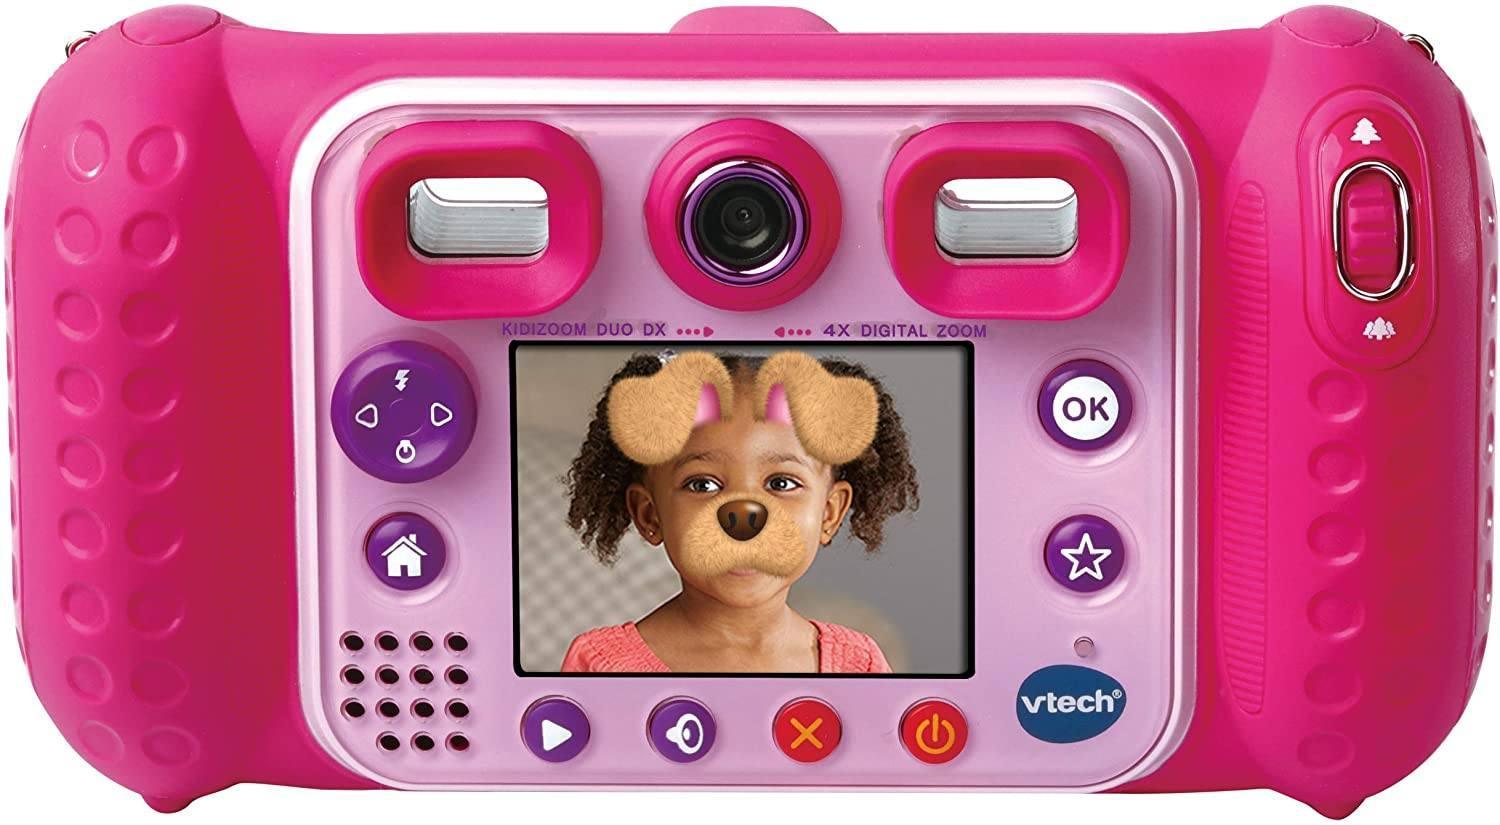  VTech - Kidizoom Duo DX Digital Camera for Kids Photos, Videos,  Filters, Music Player, Games, USB, Parental Control : Toys & Games